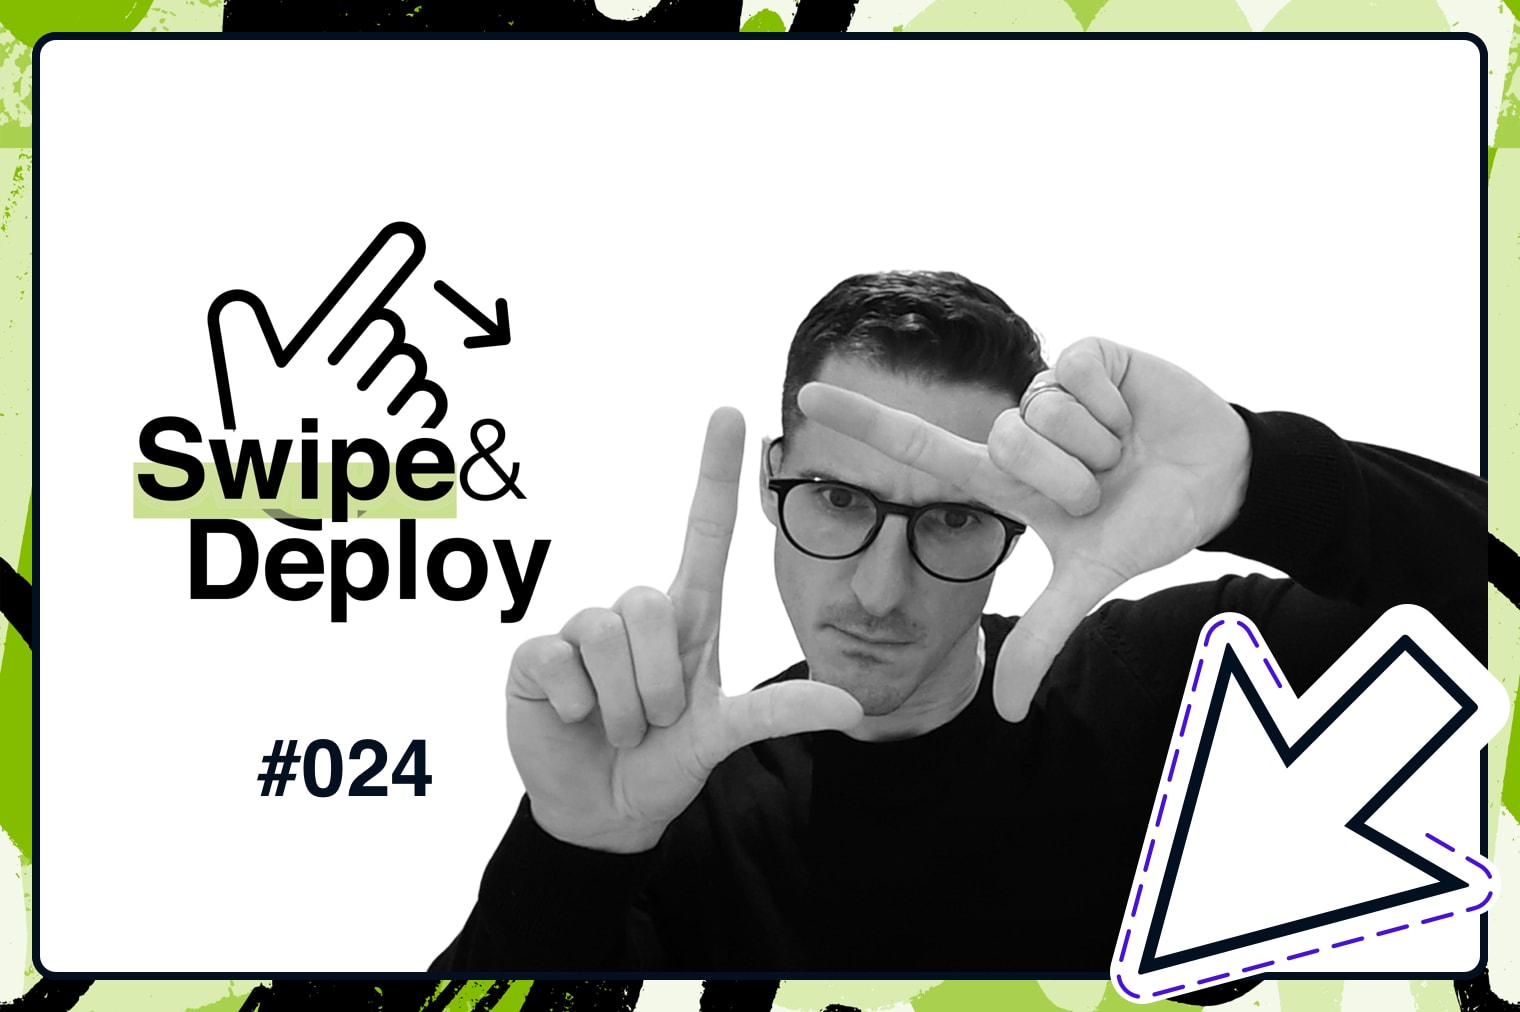 Swipe & Deploy 24 blog hero image of a man making a frame with his fingers.